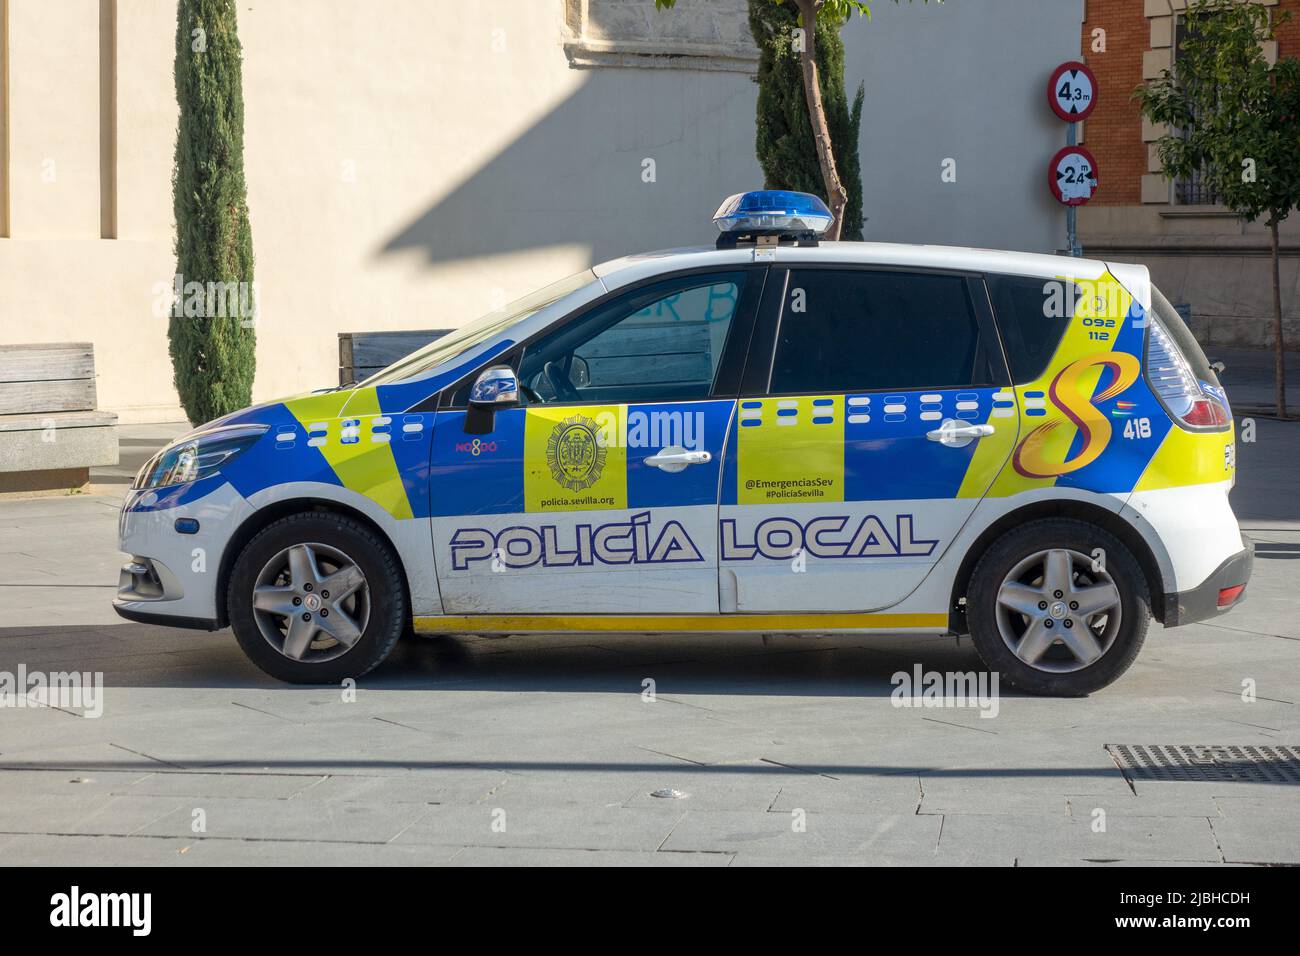 Local Seville Spain Renault Police Car Vehicle Parked In The City Centre Of Seville Spain, Policia Local Municipal Police Force Stock Photo